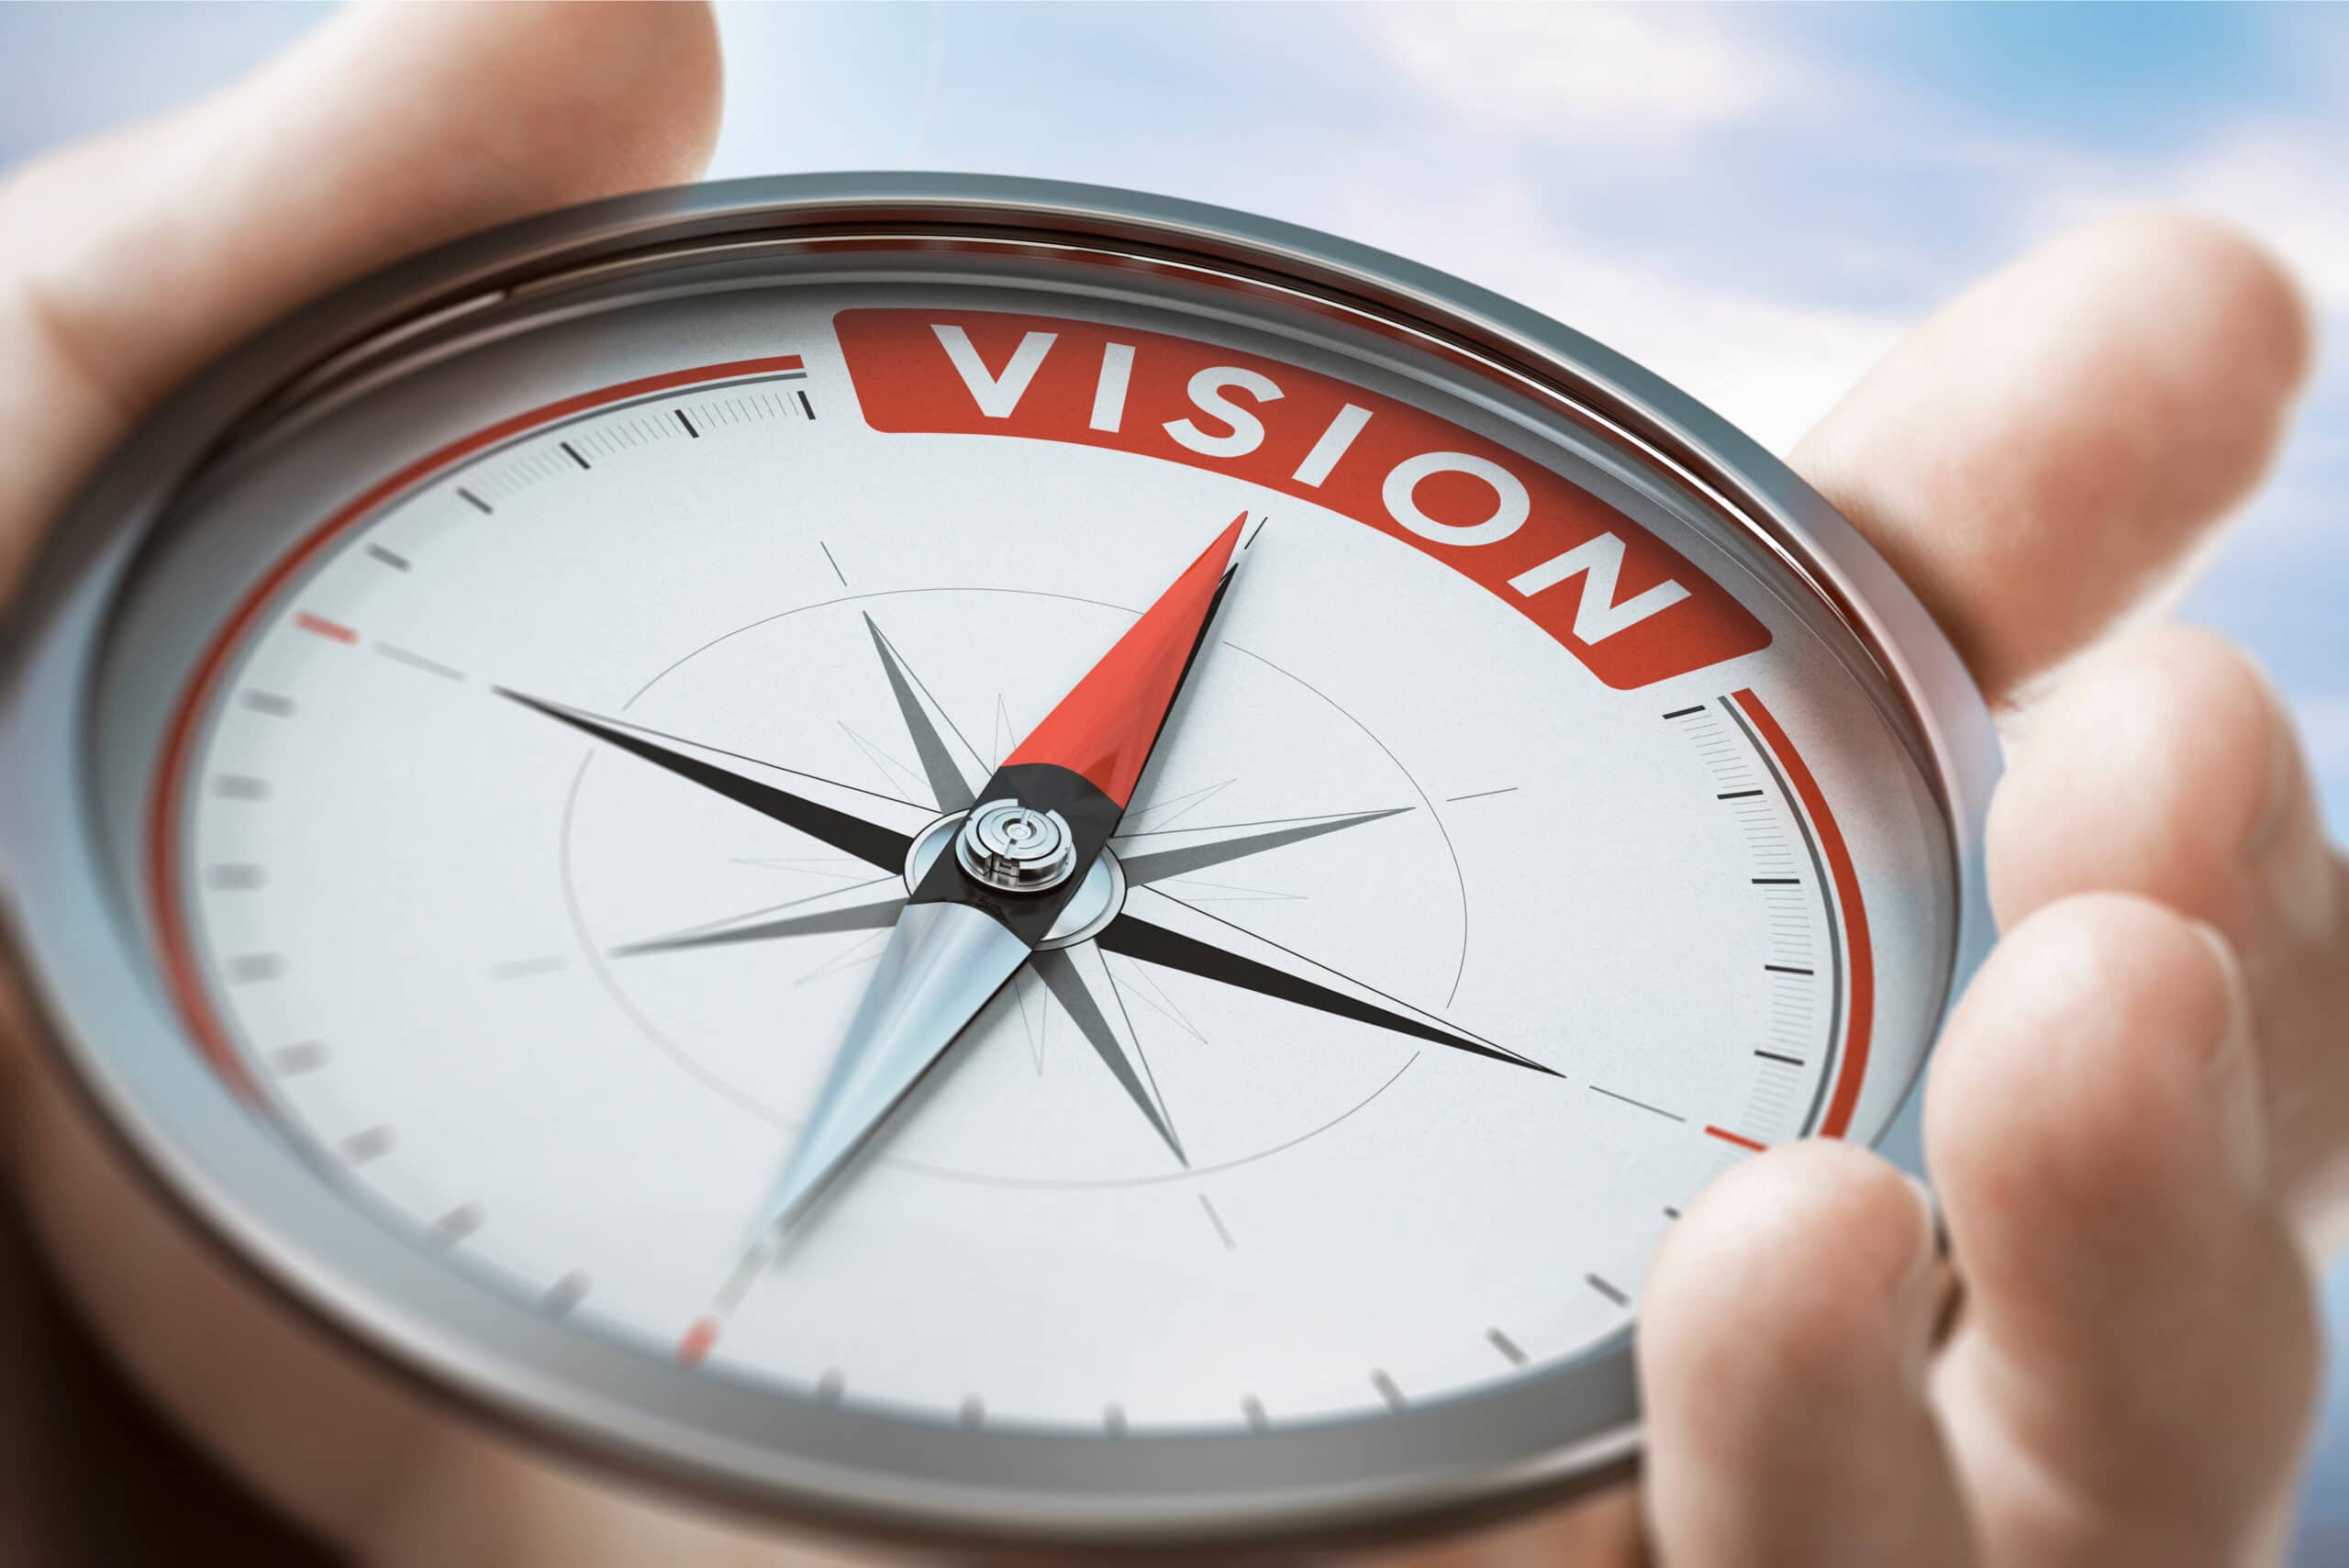 compass pointing towards the word vision